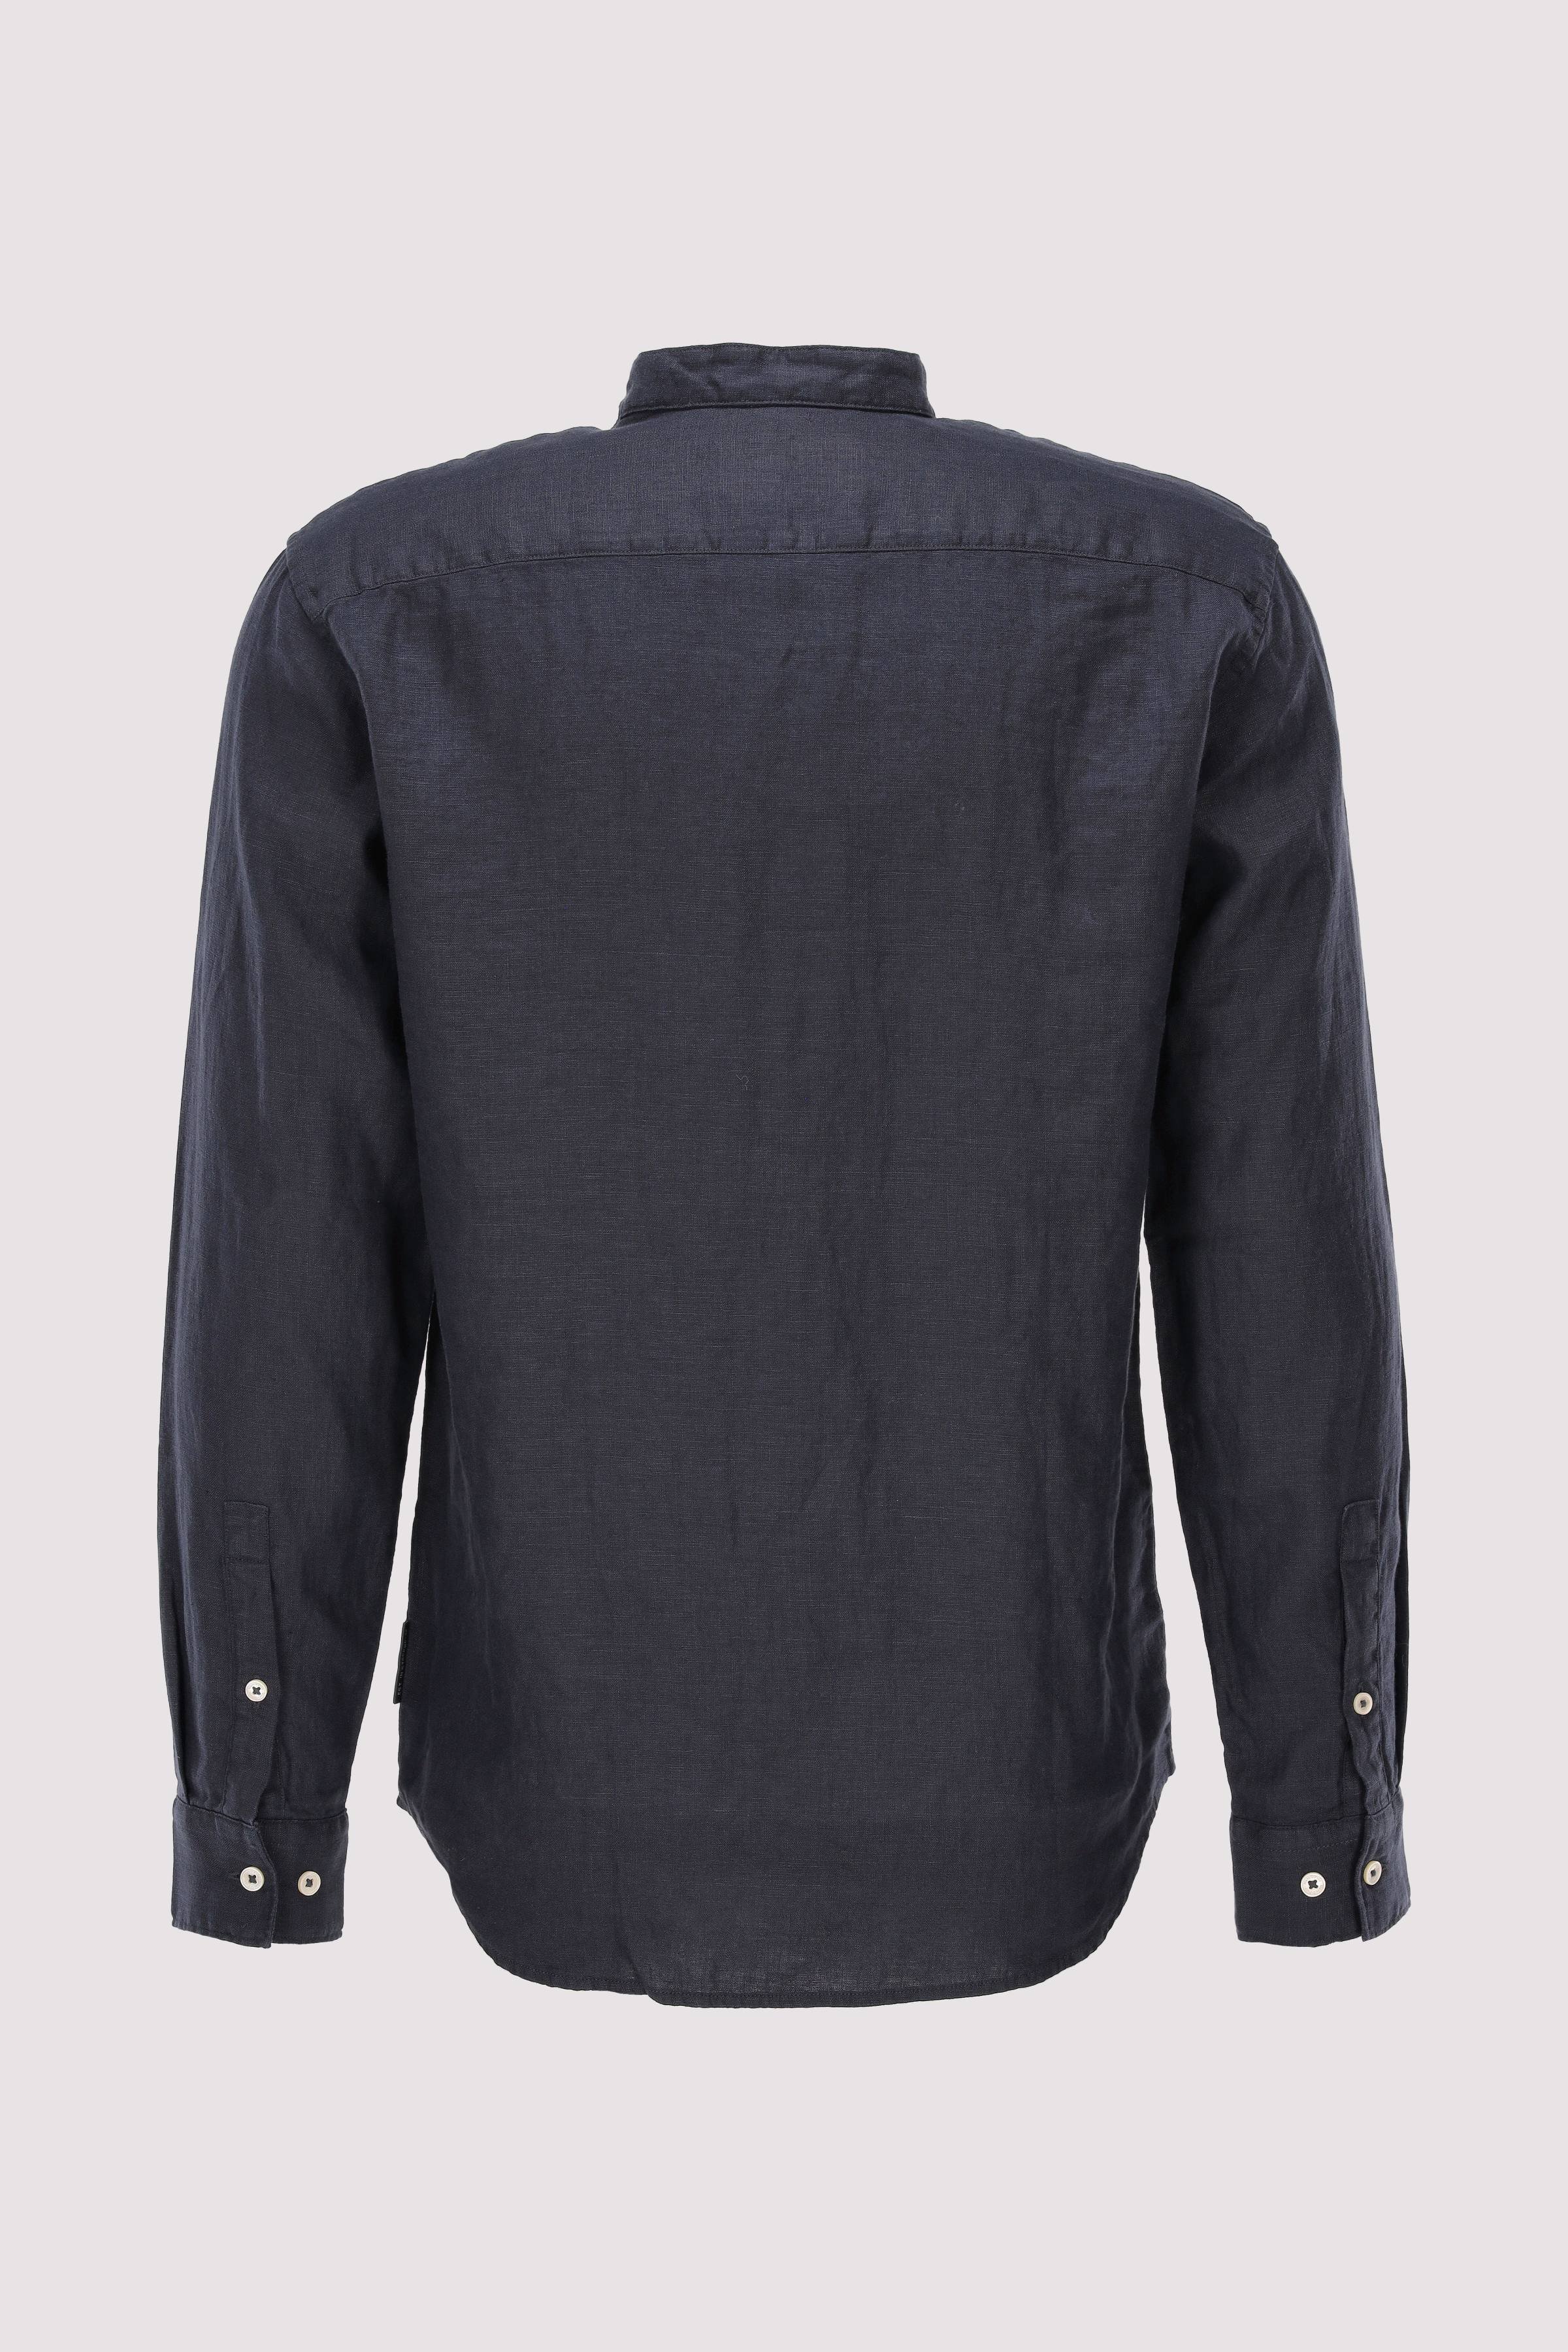 Stand up collar, long sleeves,